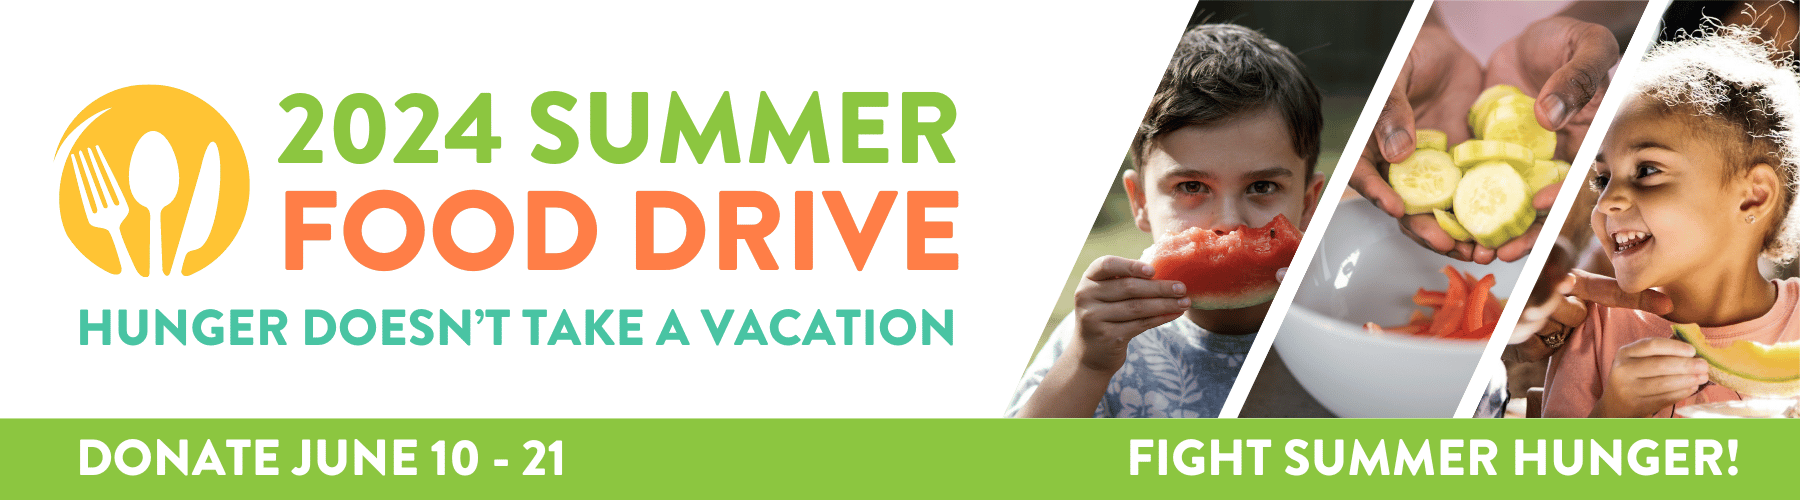 2024 Summer Food Drive : Hunger Doesn't Take a Vacation. Donate June 10 - 21.